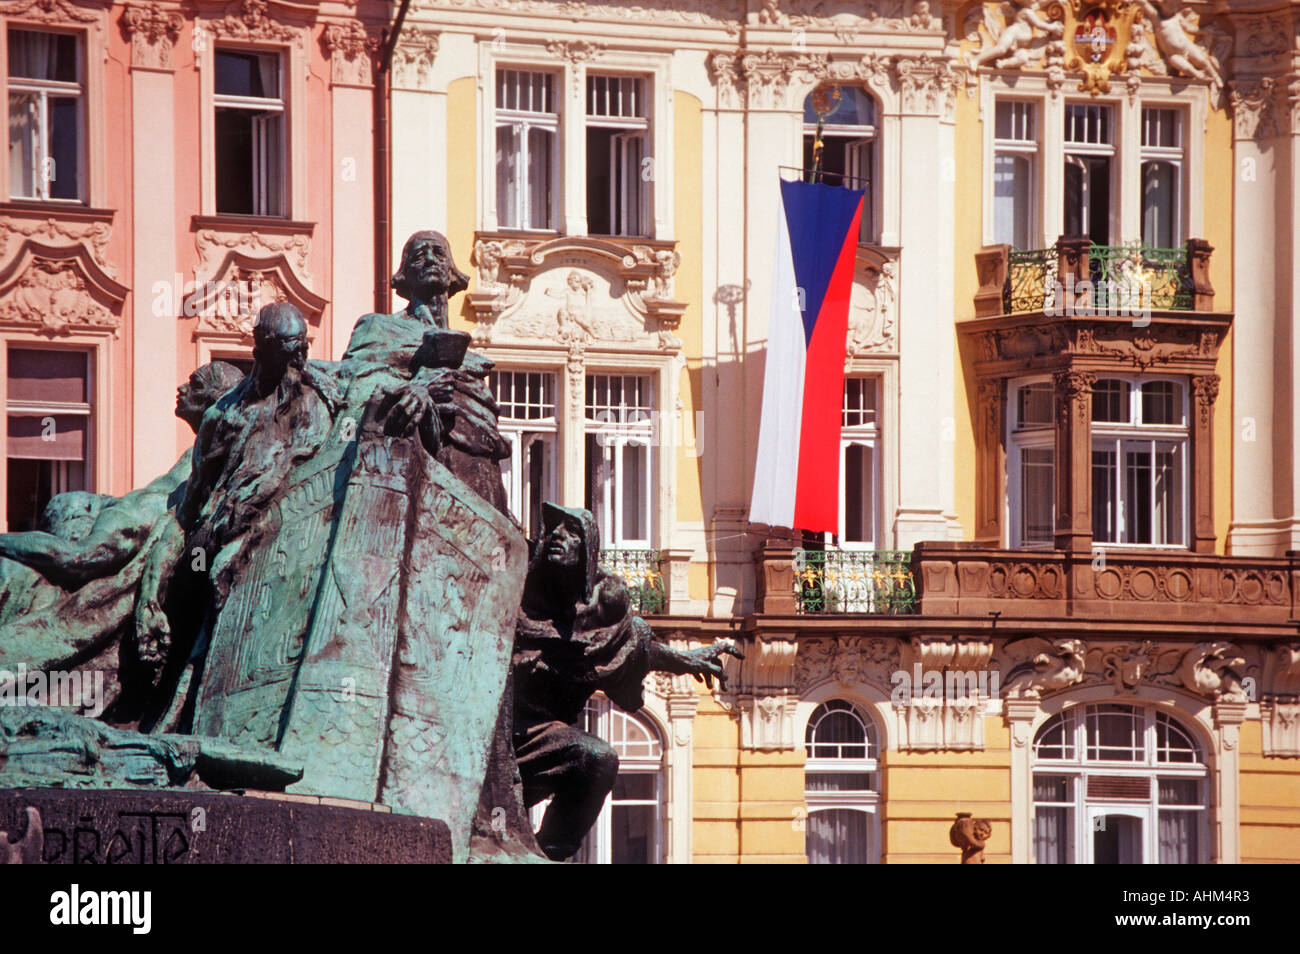 The Jan Hus statue in front of the city hall in Prague Old Town Square Stock Photo